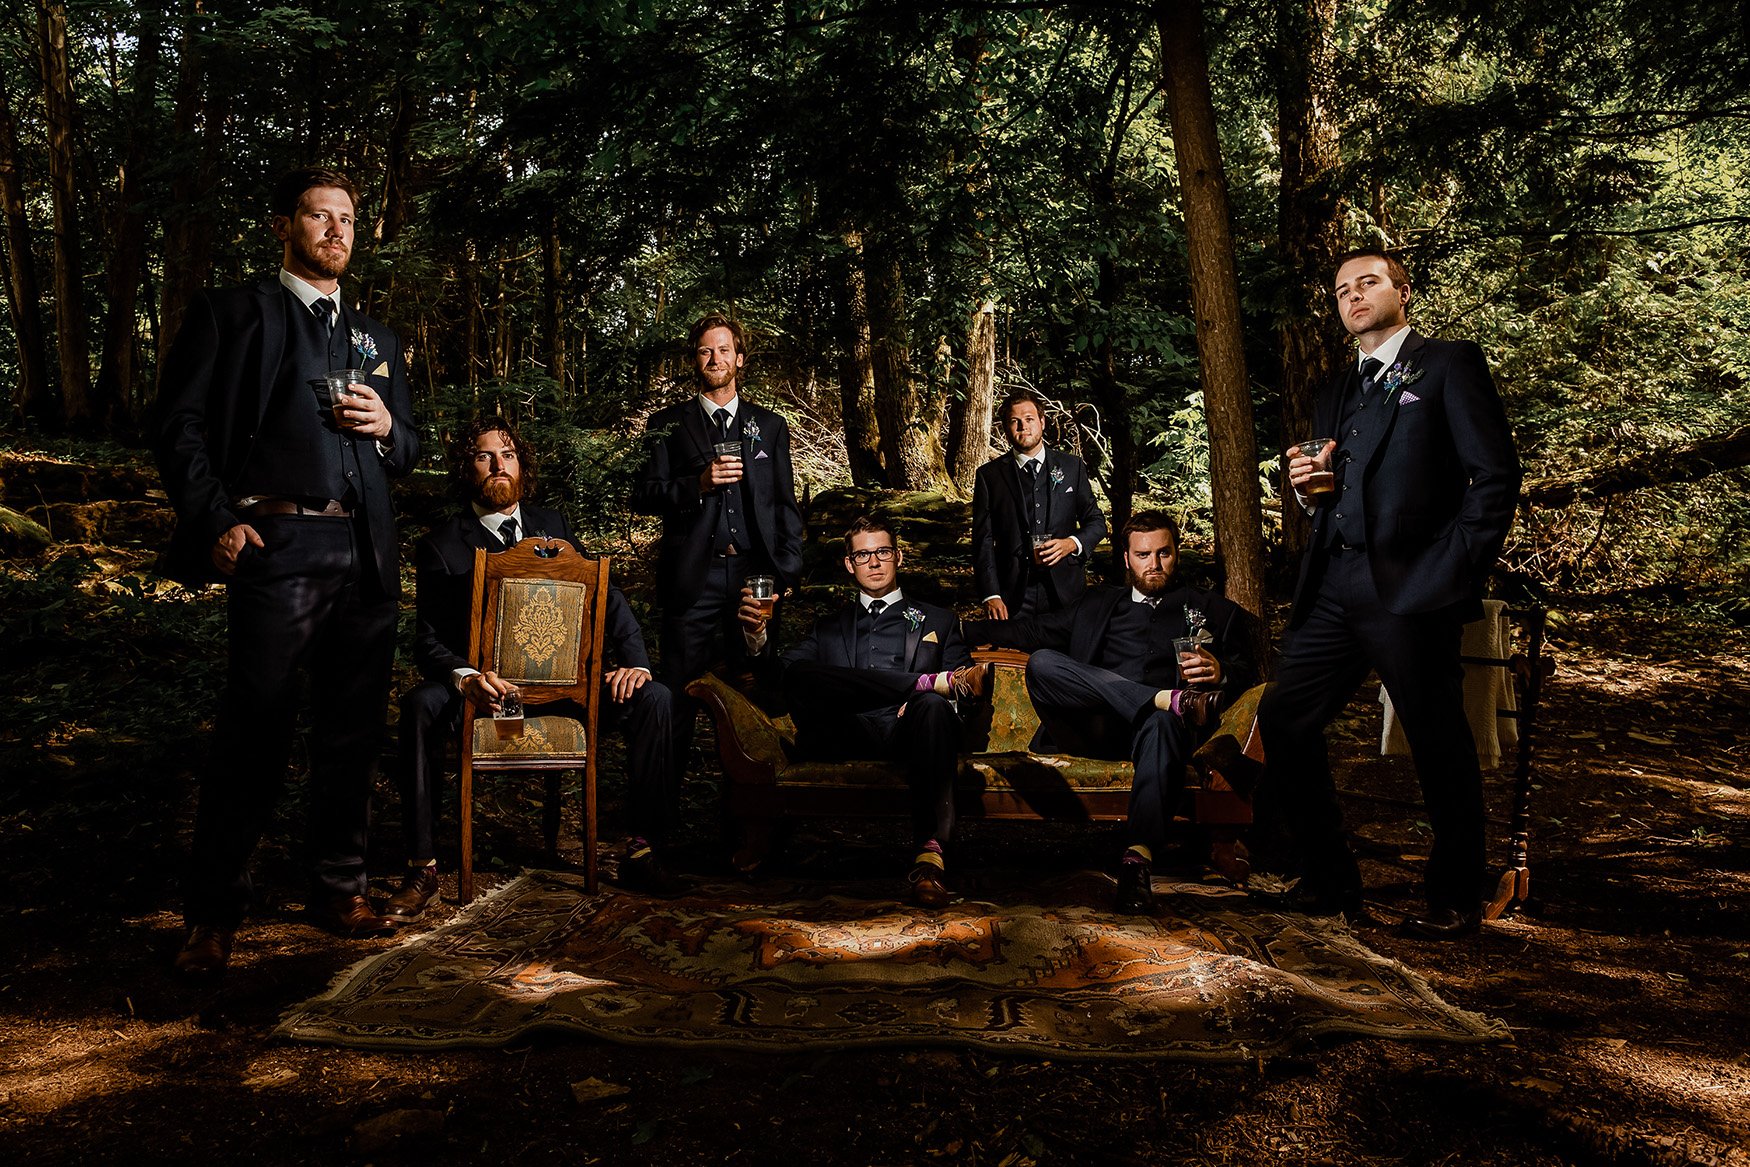 dramatic wedding party portrait in the forest (Copy)